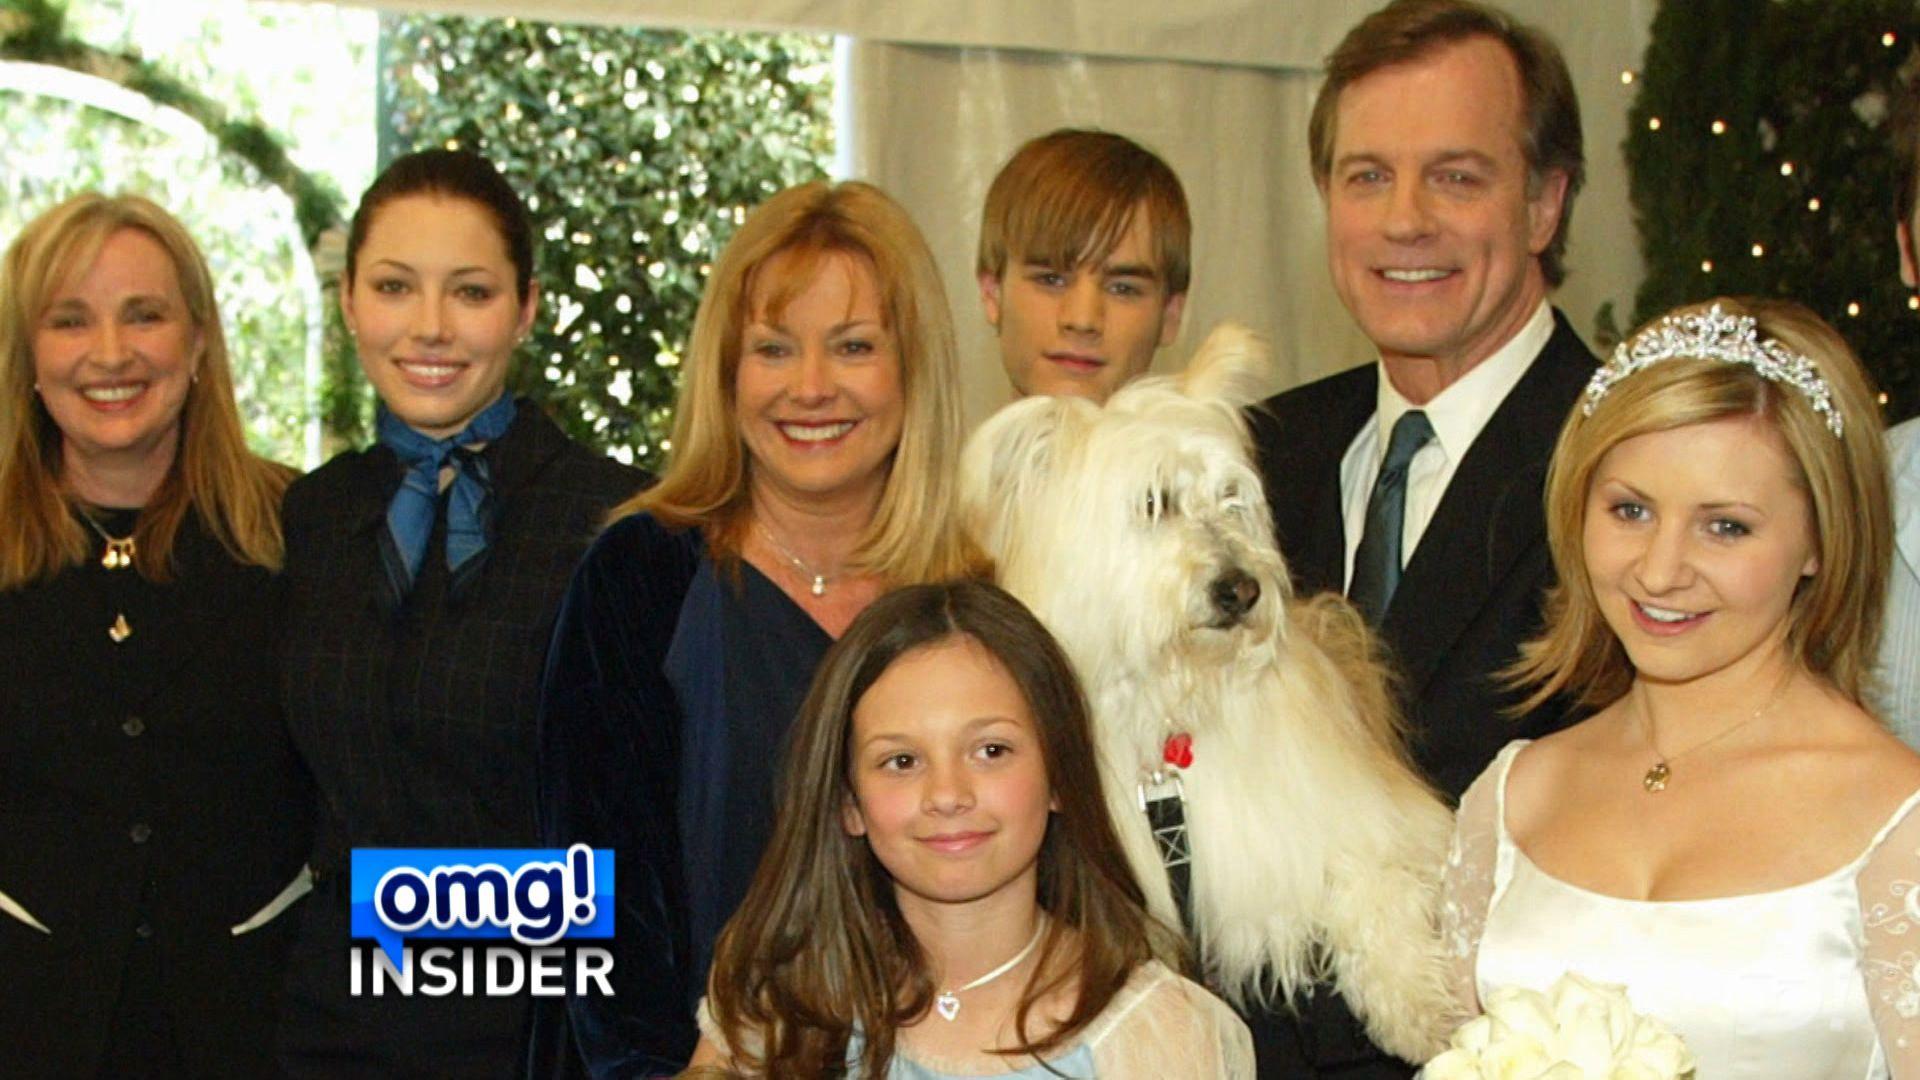 7th Heaven' TV Mom Catherine Hicks Dishes on Her Favorite Camden